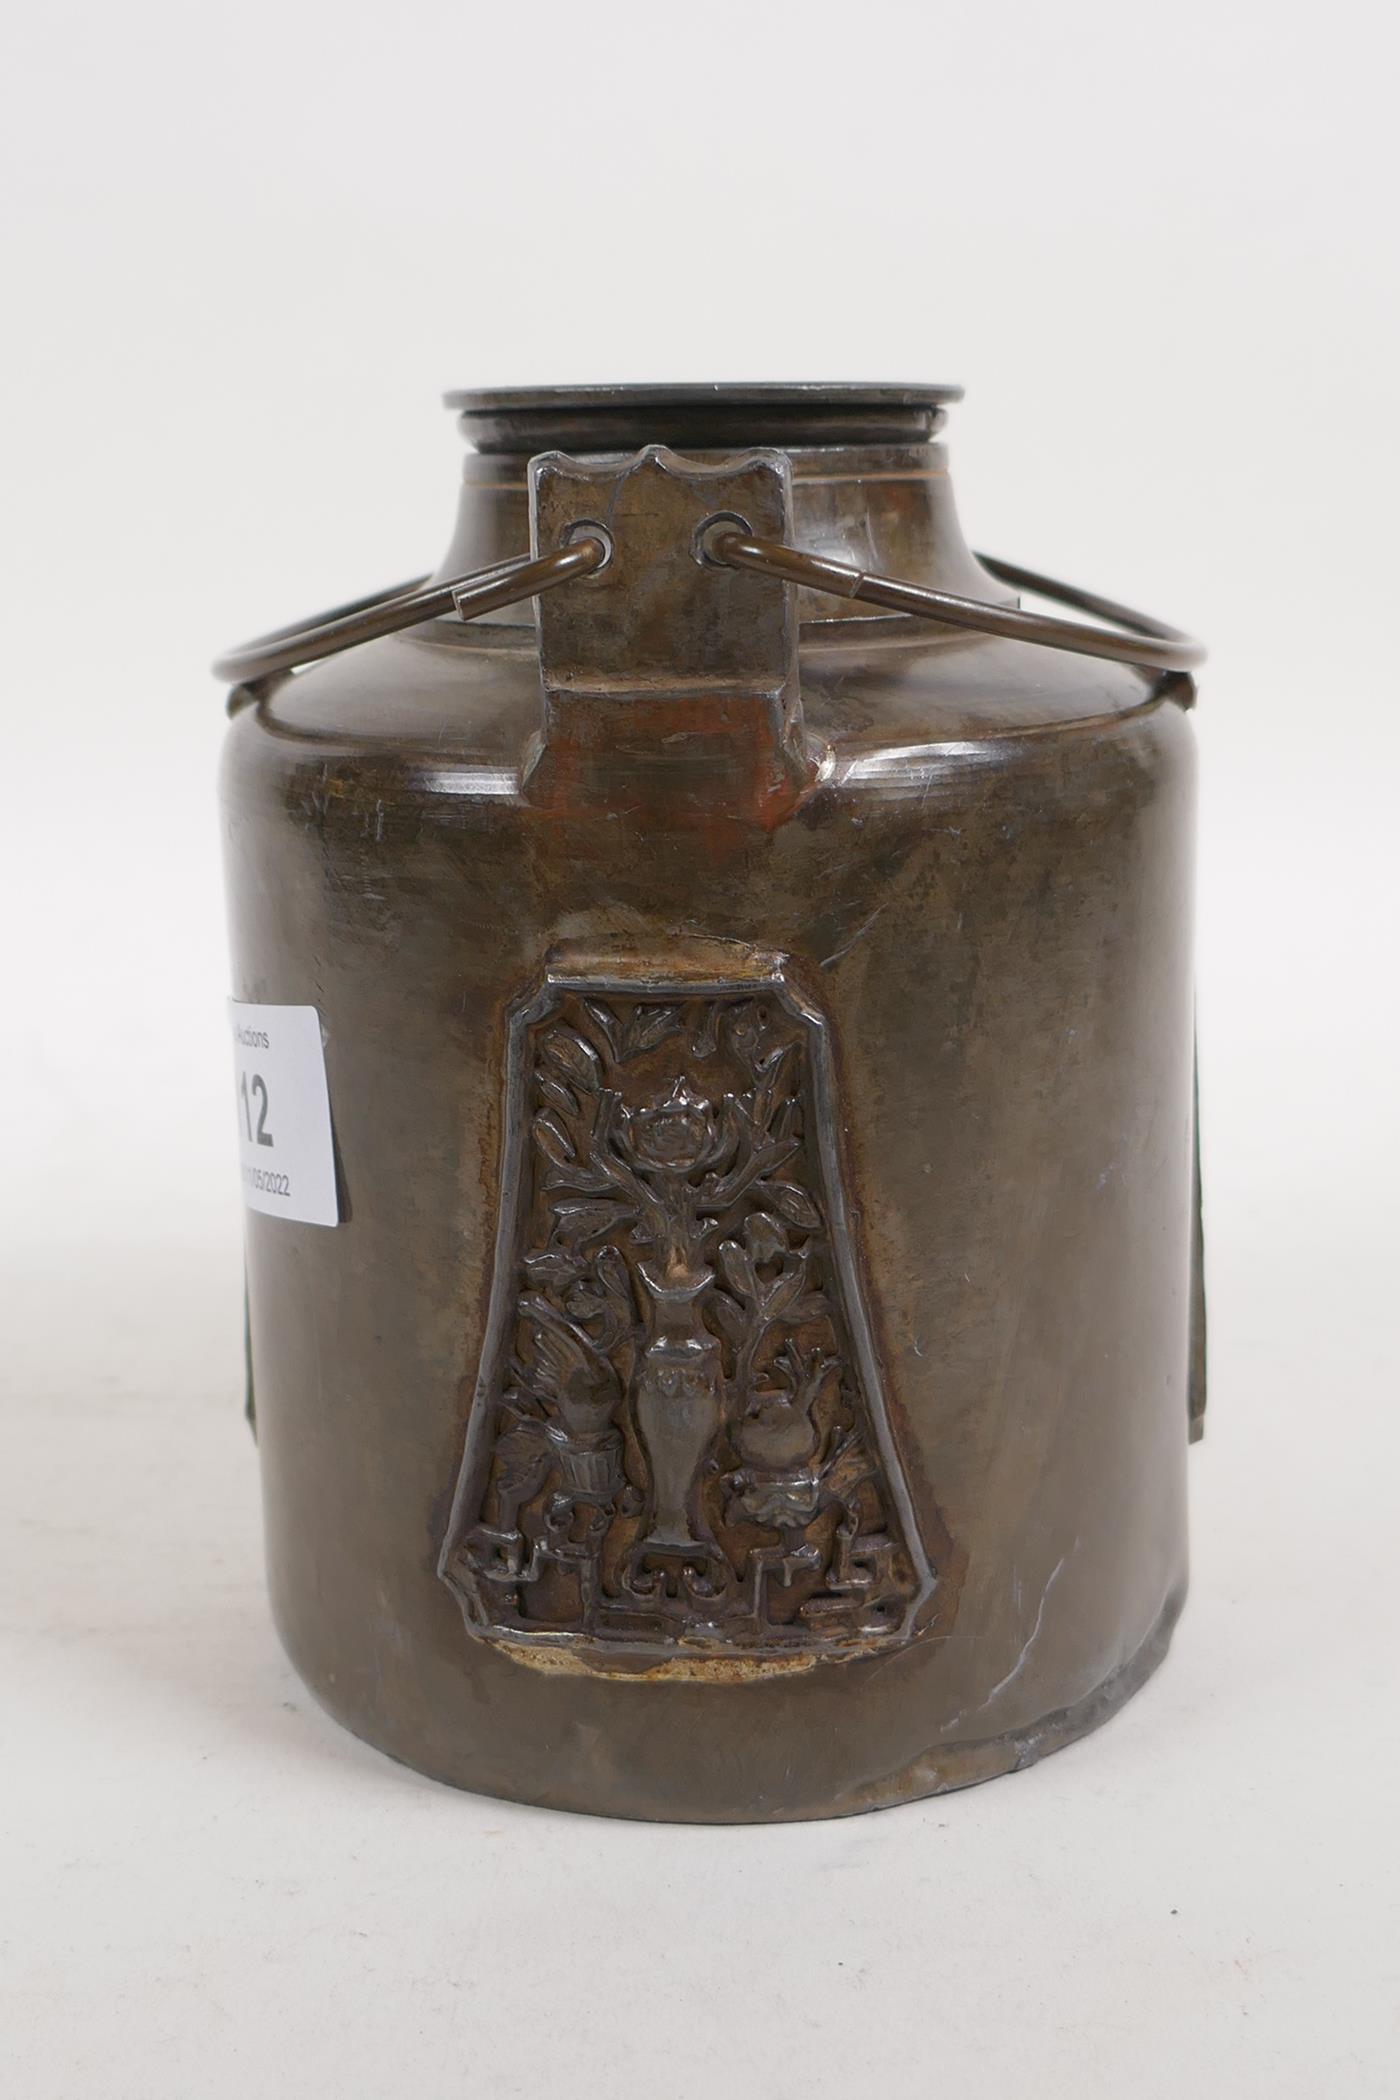 An antique Chinese pewter tea pot with applied decorative panels in relief and removable infuser/ - Image 3 of 6